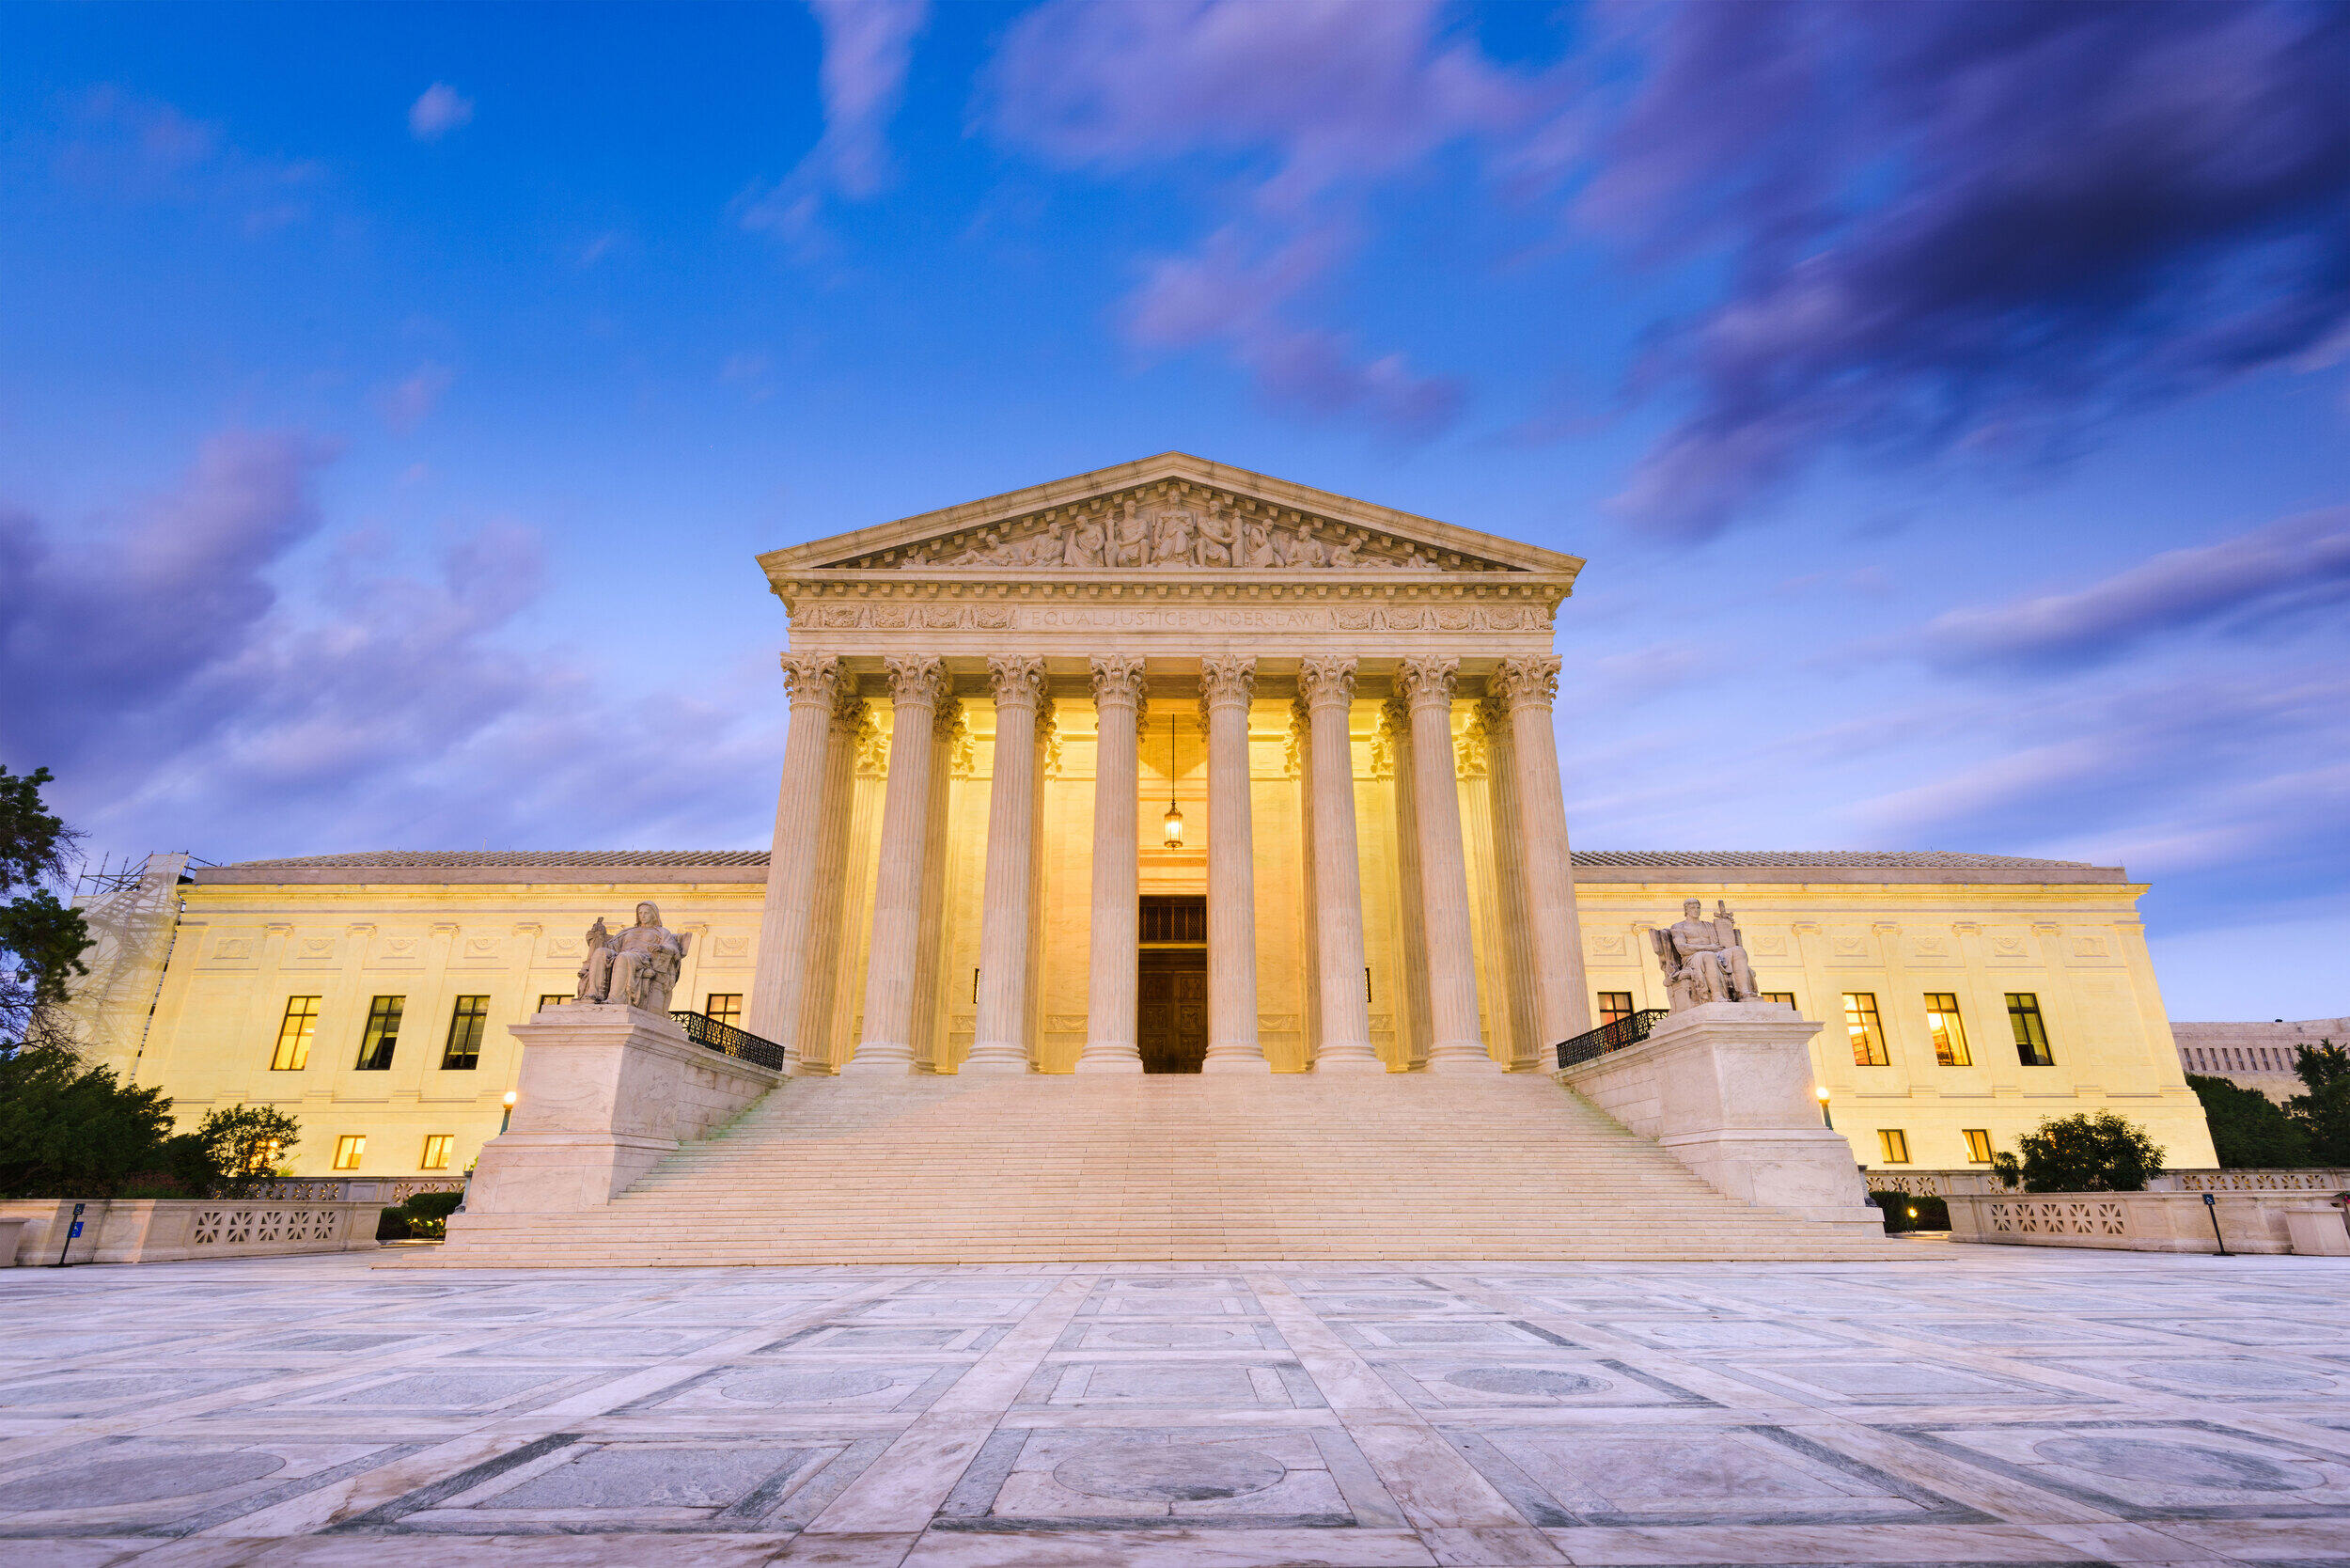 The Supreme Court building located in Washington, D.C.